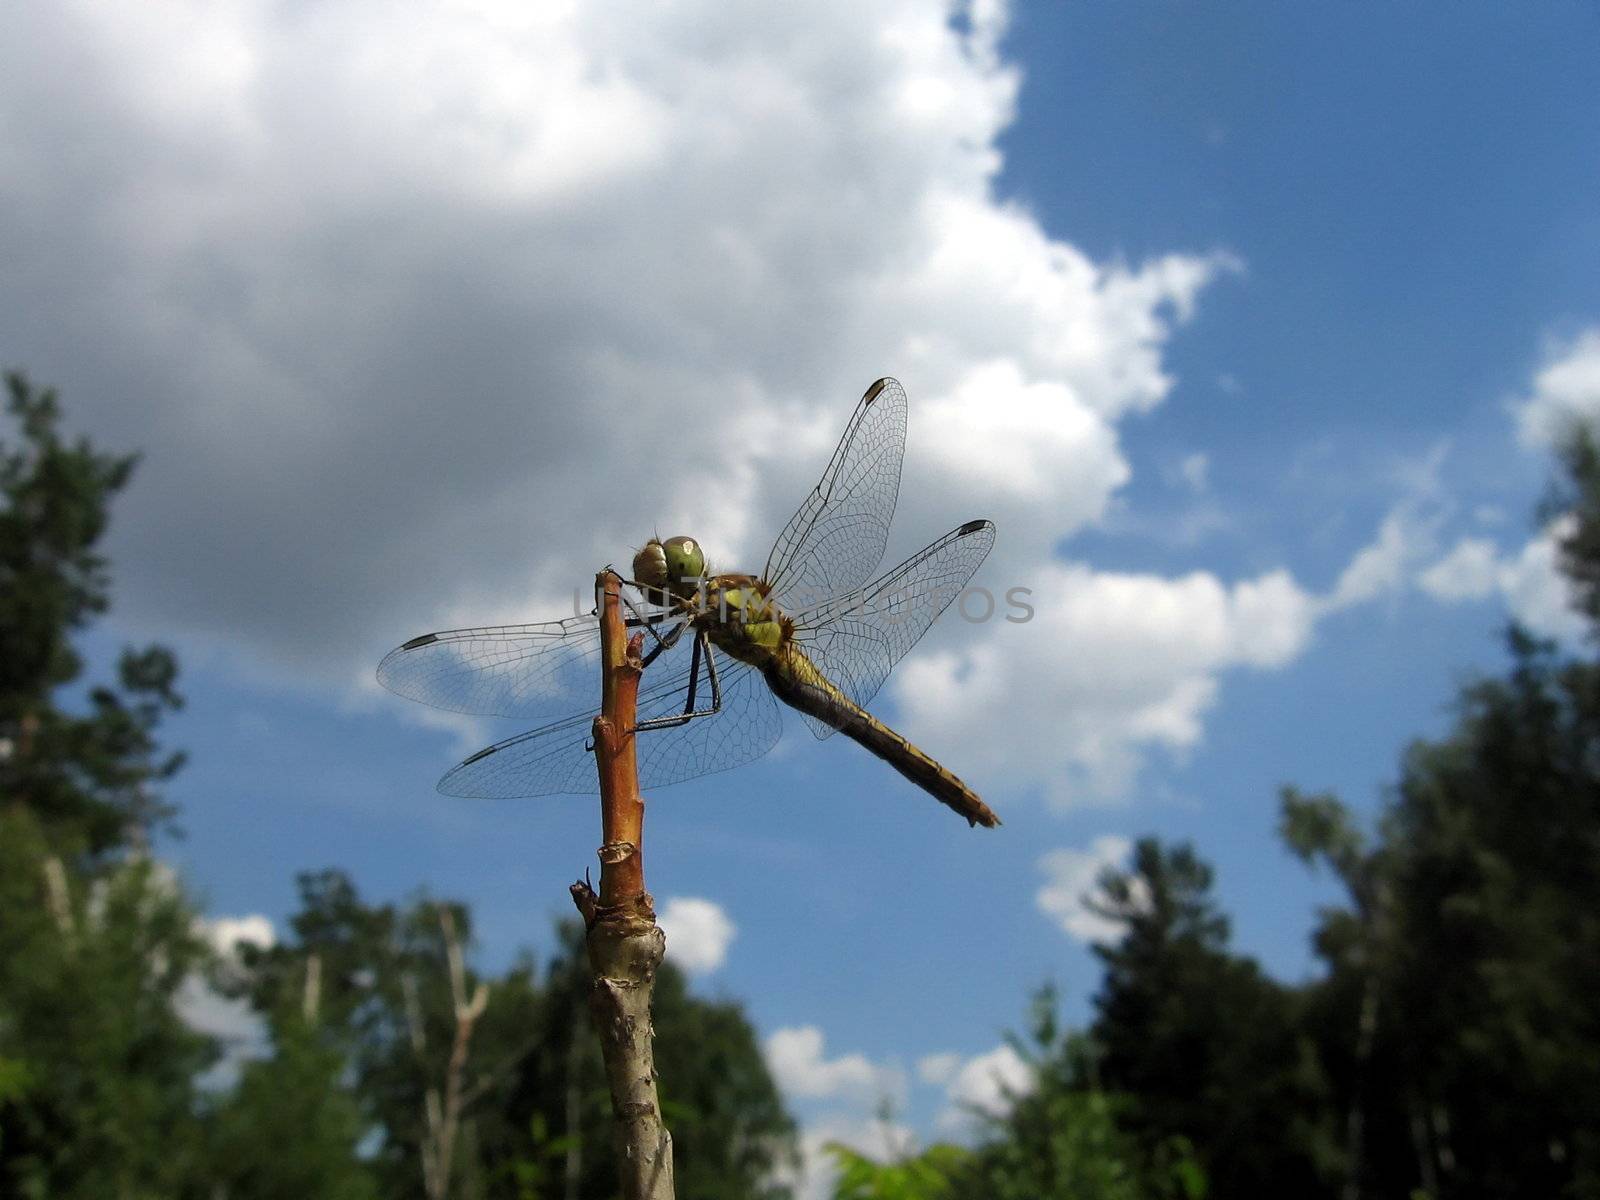 Dragonfly on stalk by tomatto